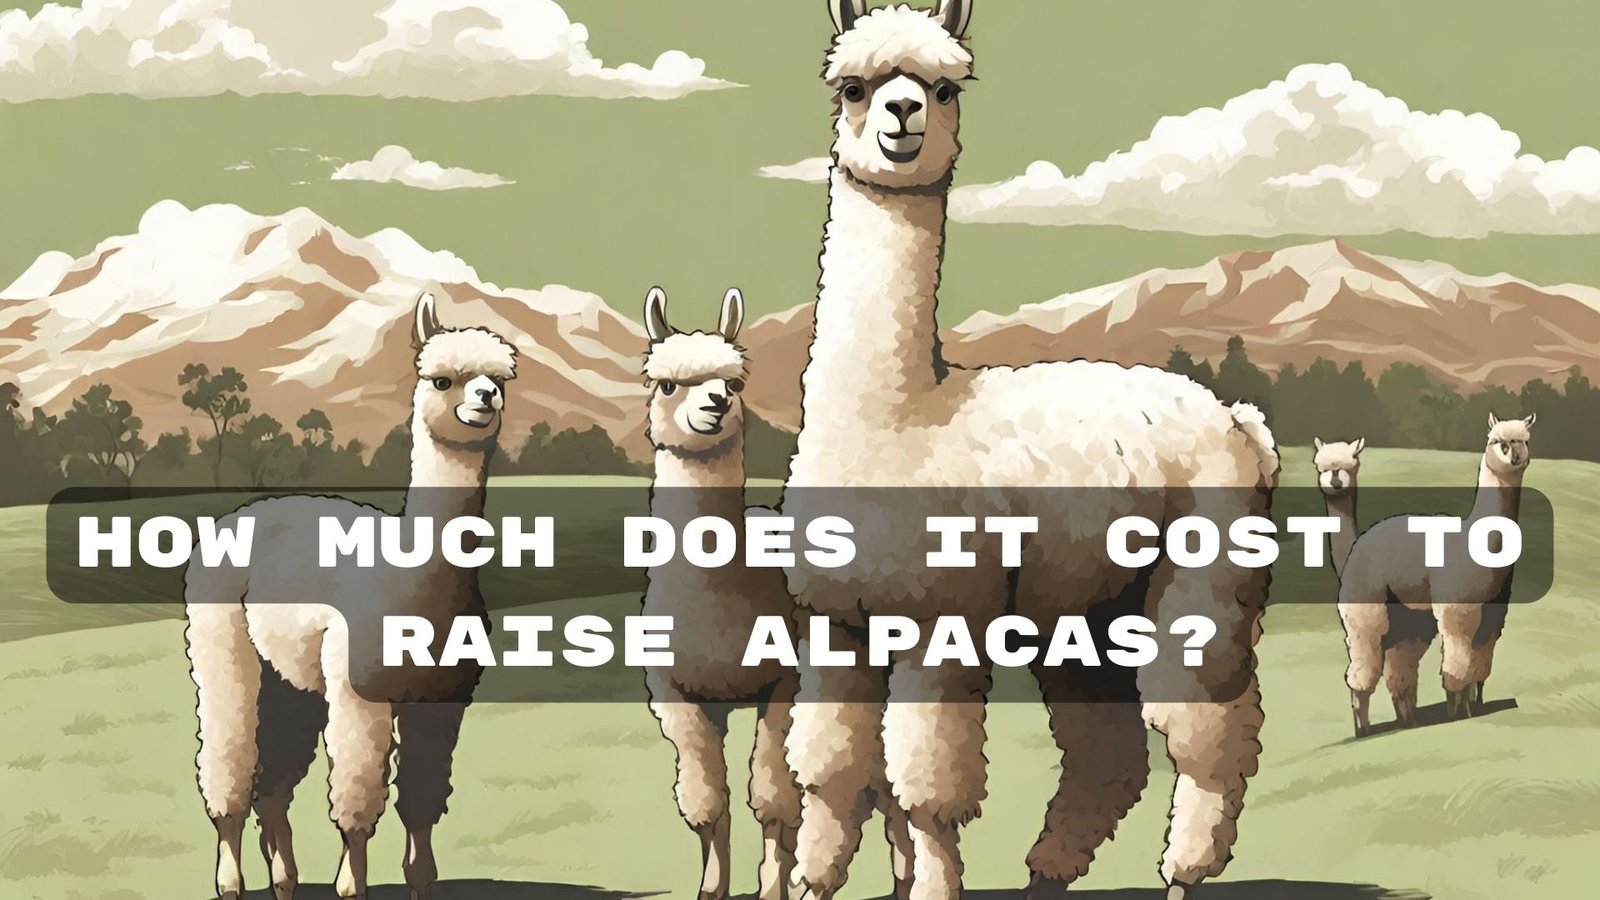 How Much Does It Cost to Raise Alpacas?